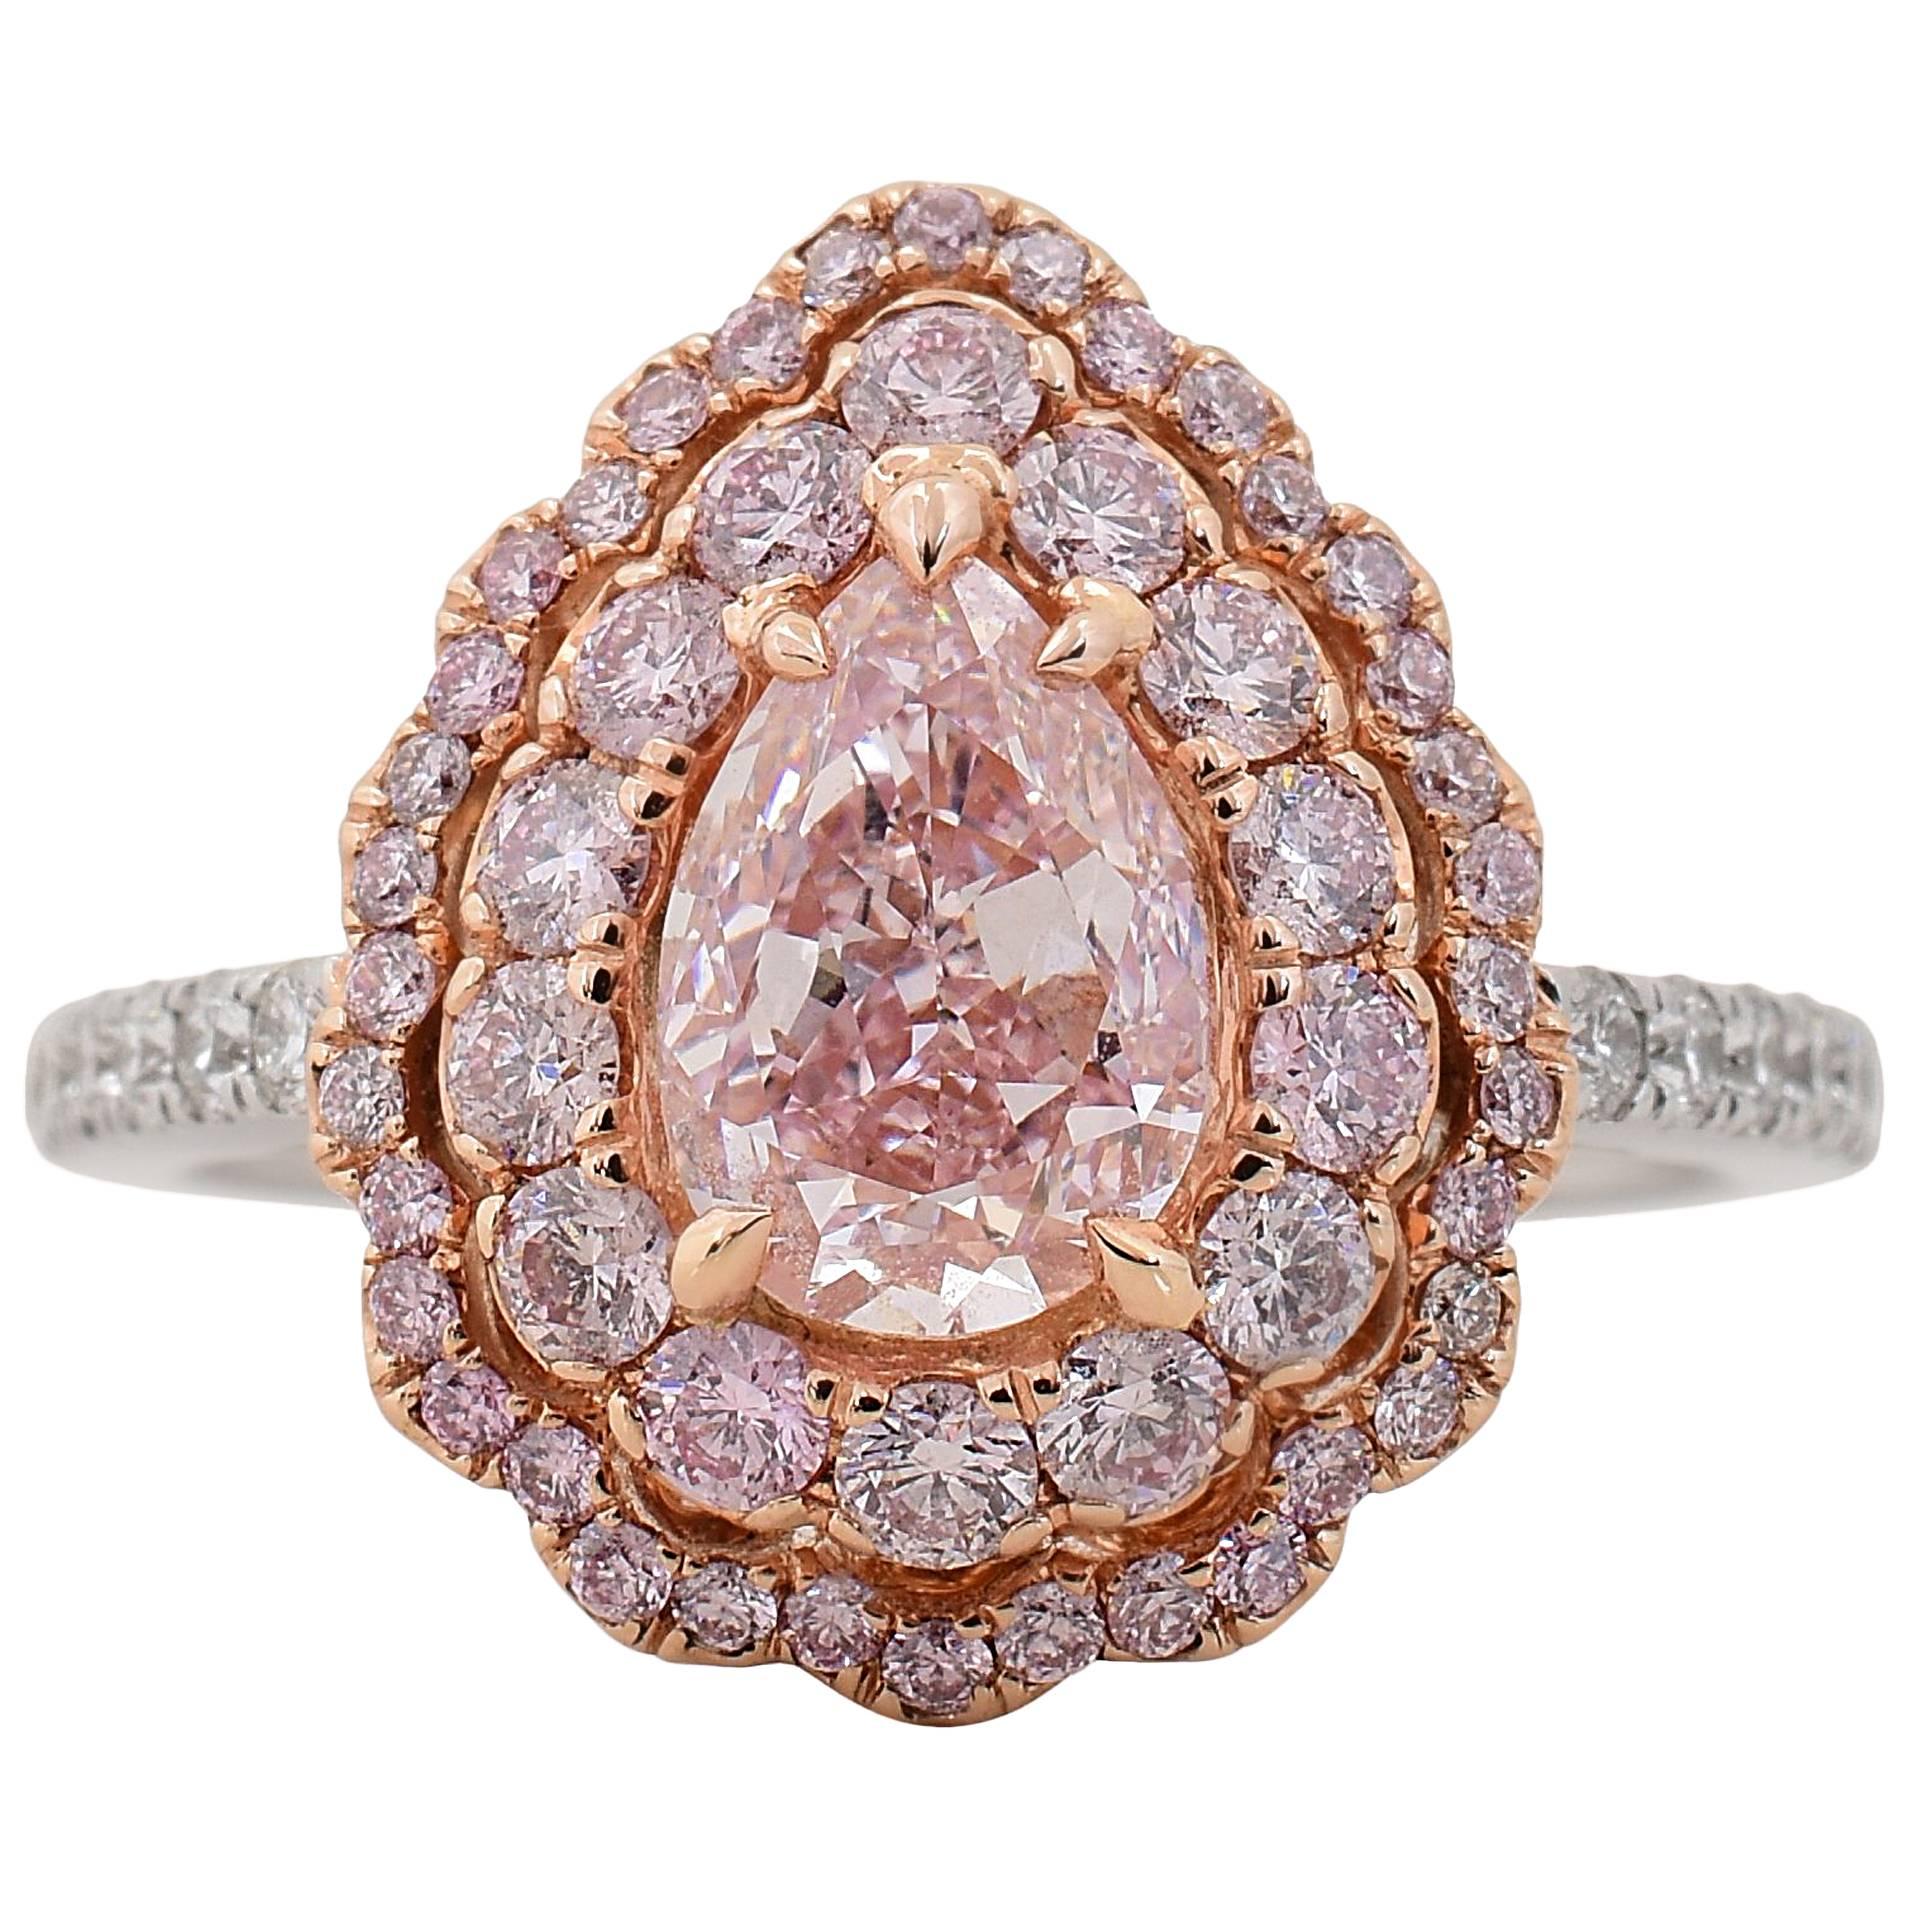 GIA Certified 1.21 Carat Fancy Pink Diamond Engagement Ring For Sale